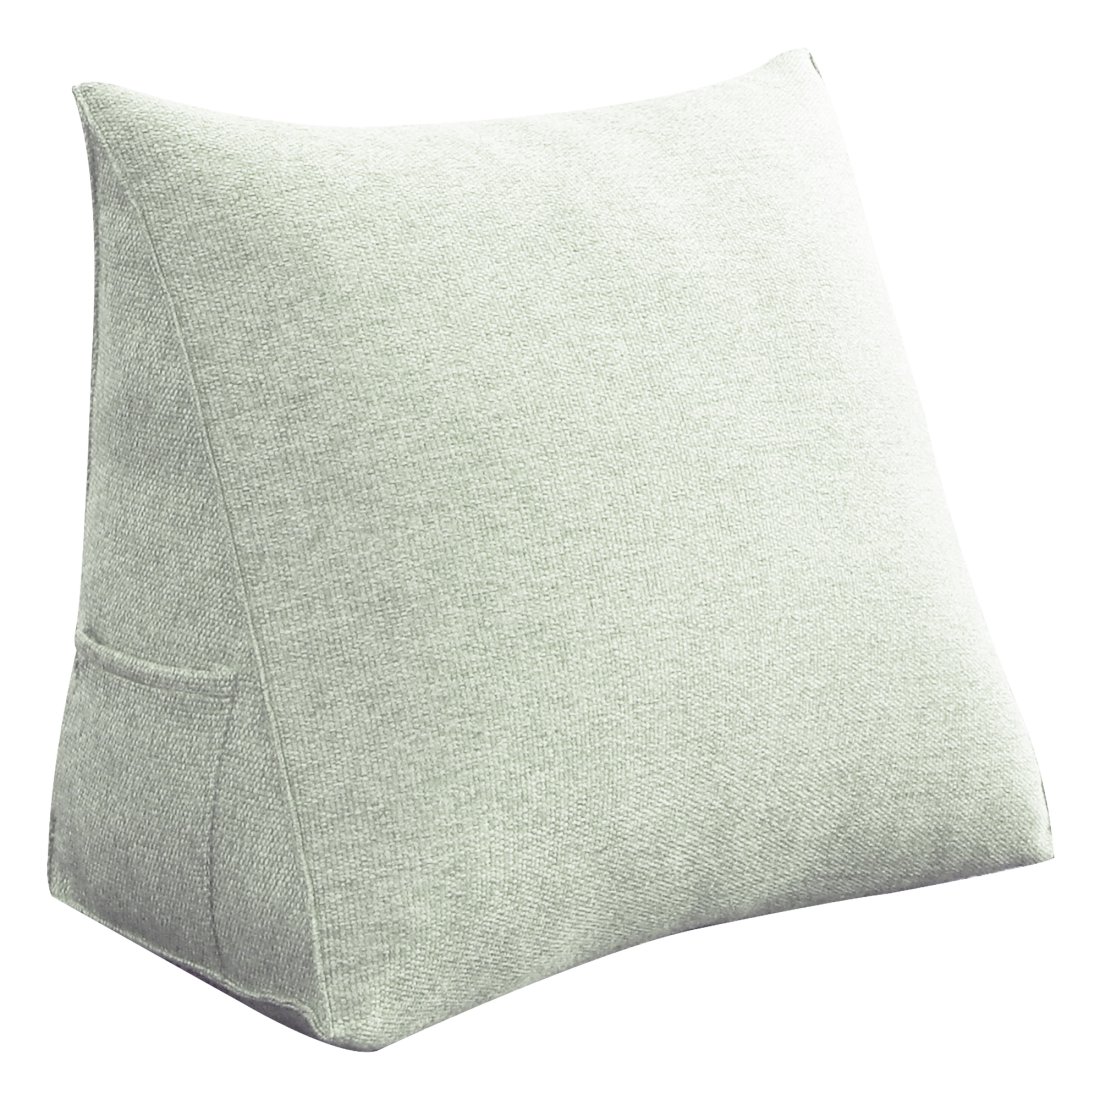 Large Lightweight Bed Reading Pillow Back Support Pillow for